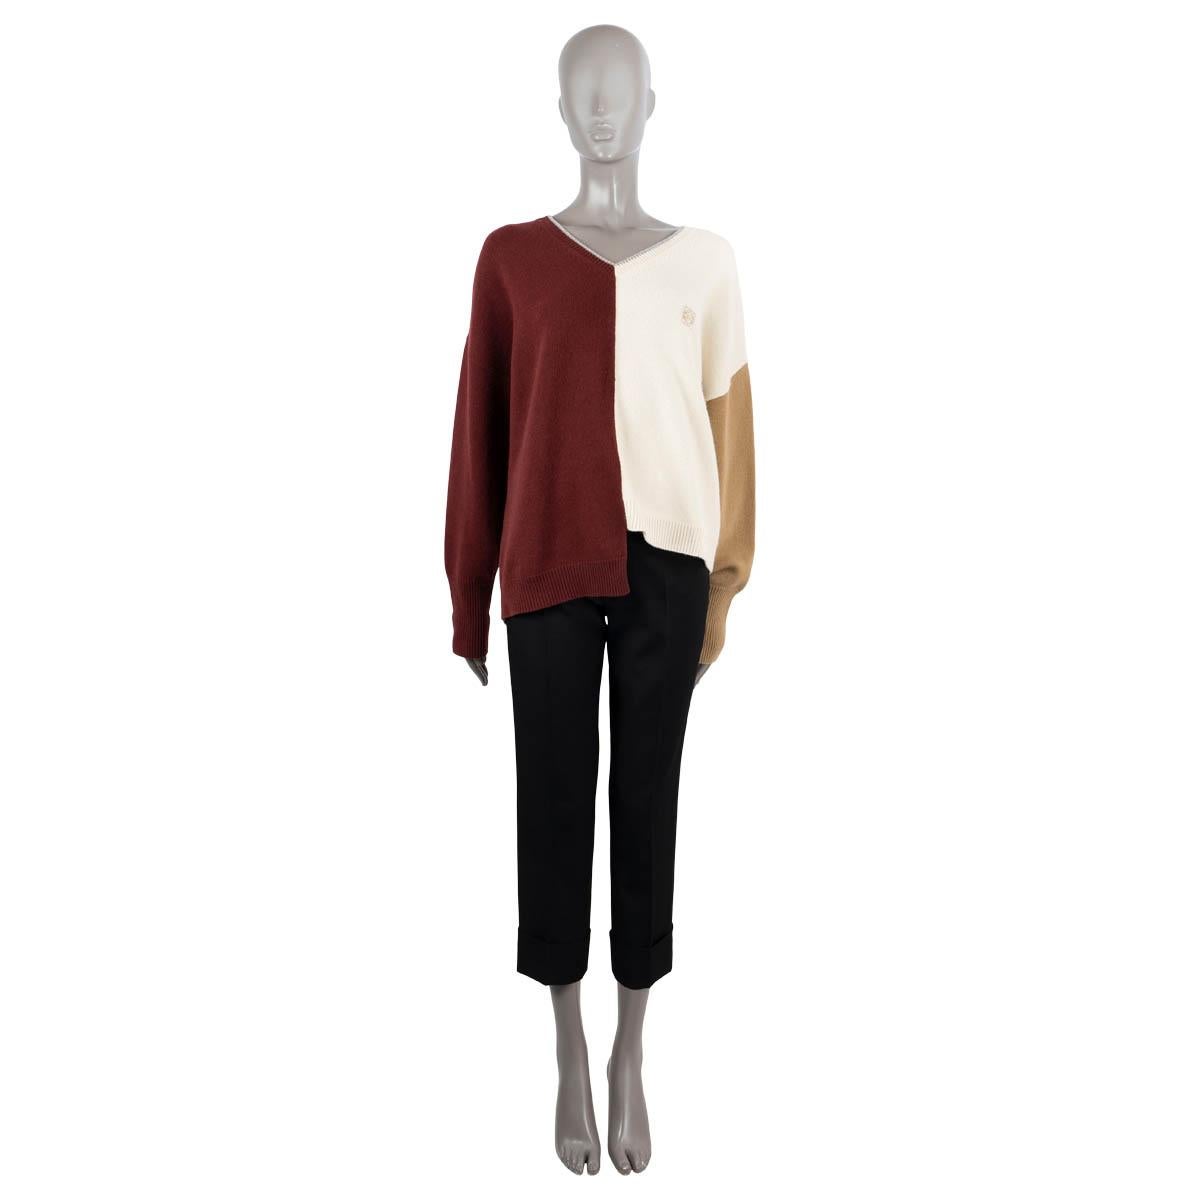 100% authentic Loewe colorblock sweater in burgundy, ivory, camel and grey wool (100%). Feaures a V-neck, asymmetric hem linen, Anagram embroidery at the chest and rib knit cuffs and hem. Has been worn and is in excellent condition.